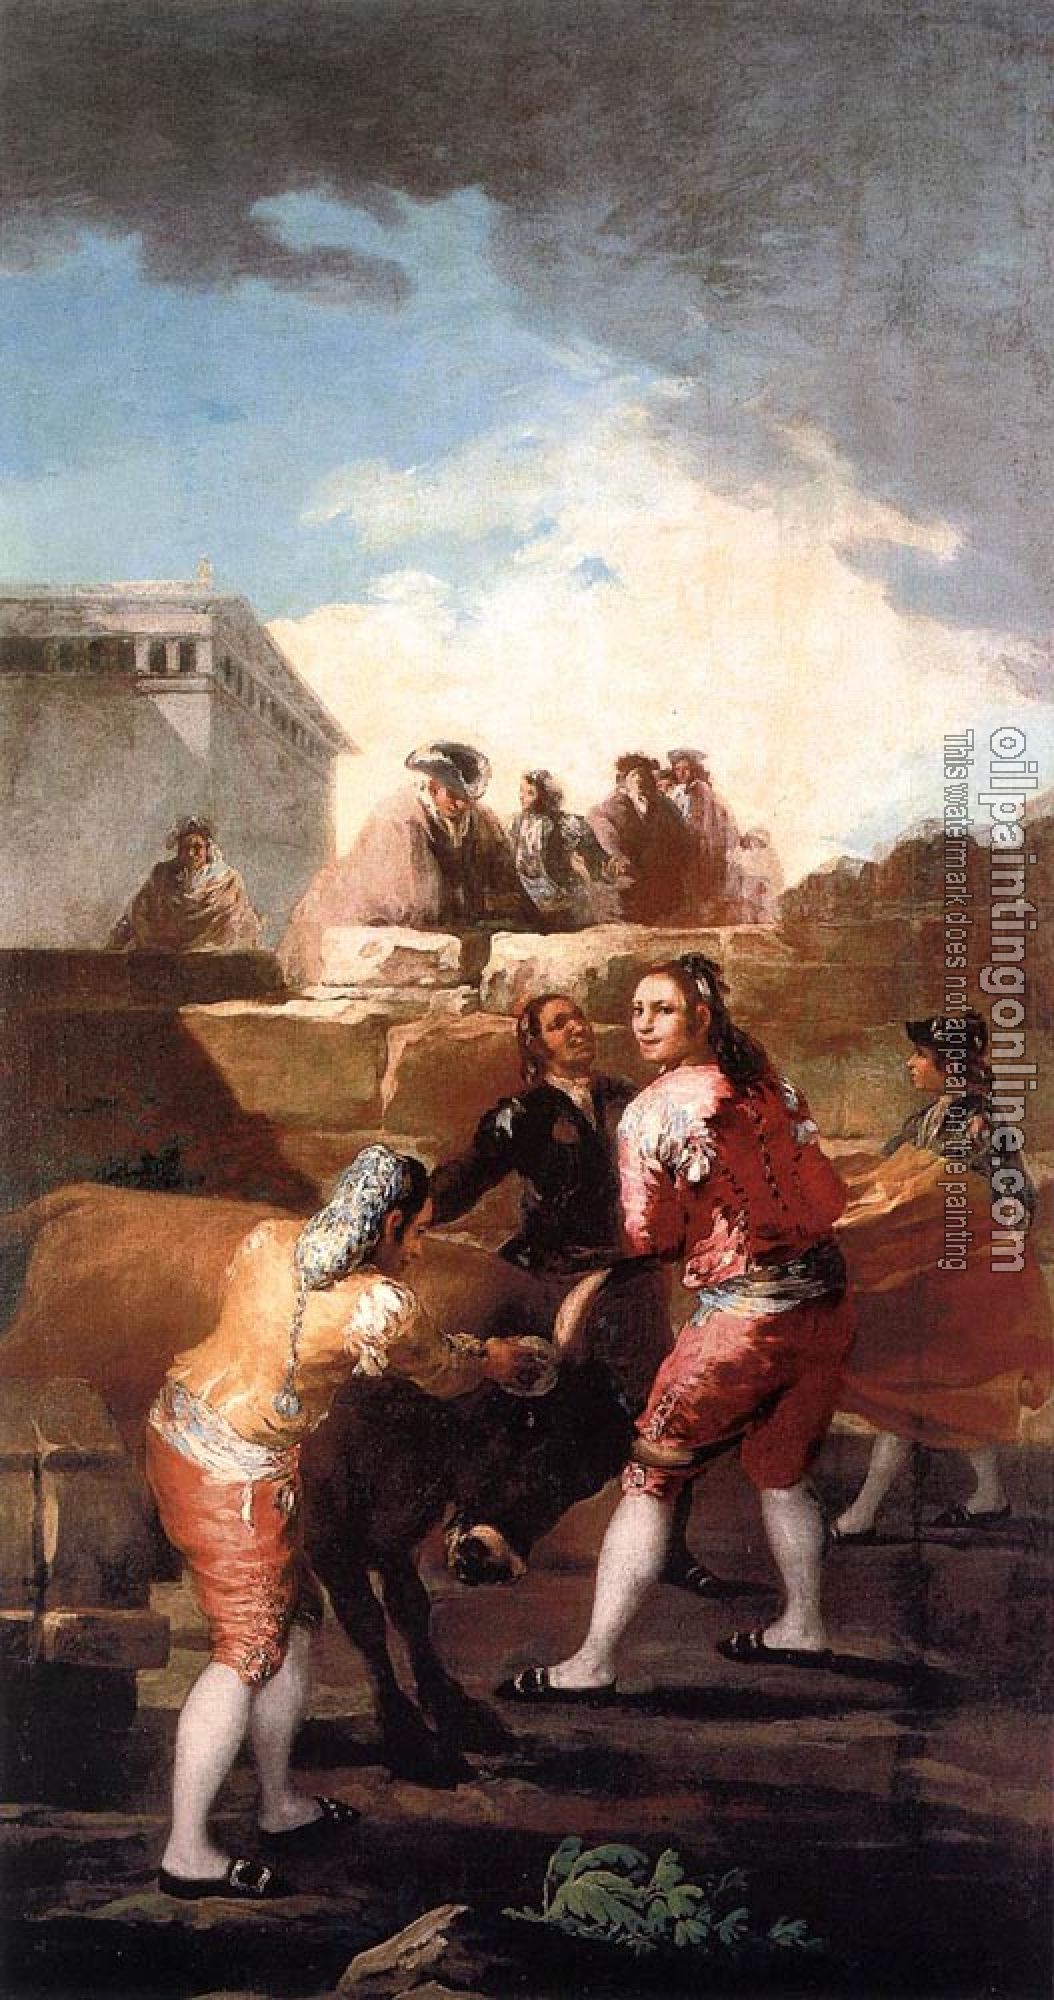 Goya, Francisco de - Fight with a Young Bull